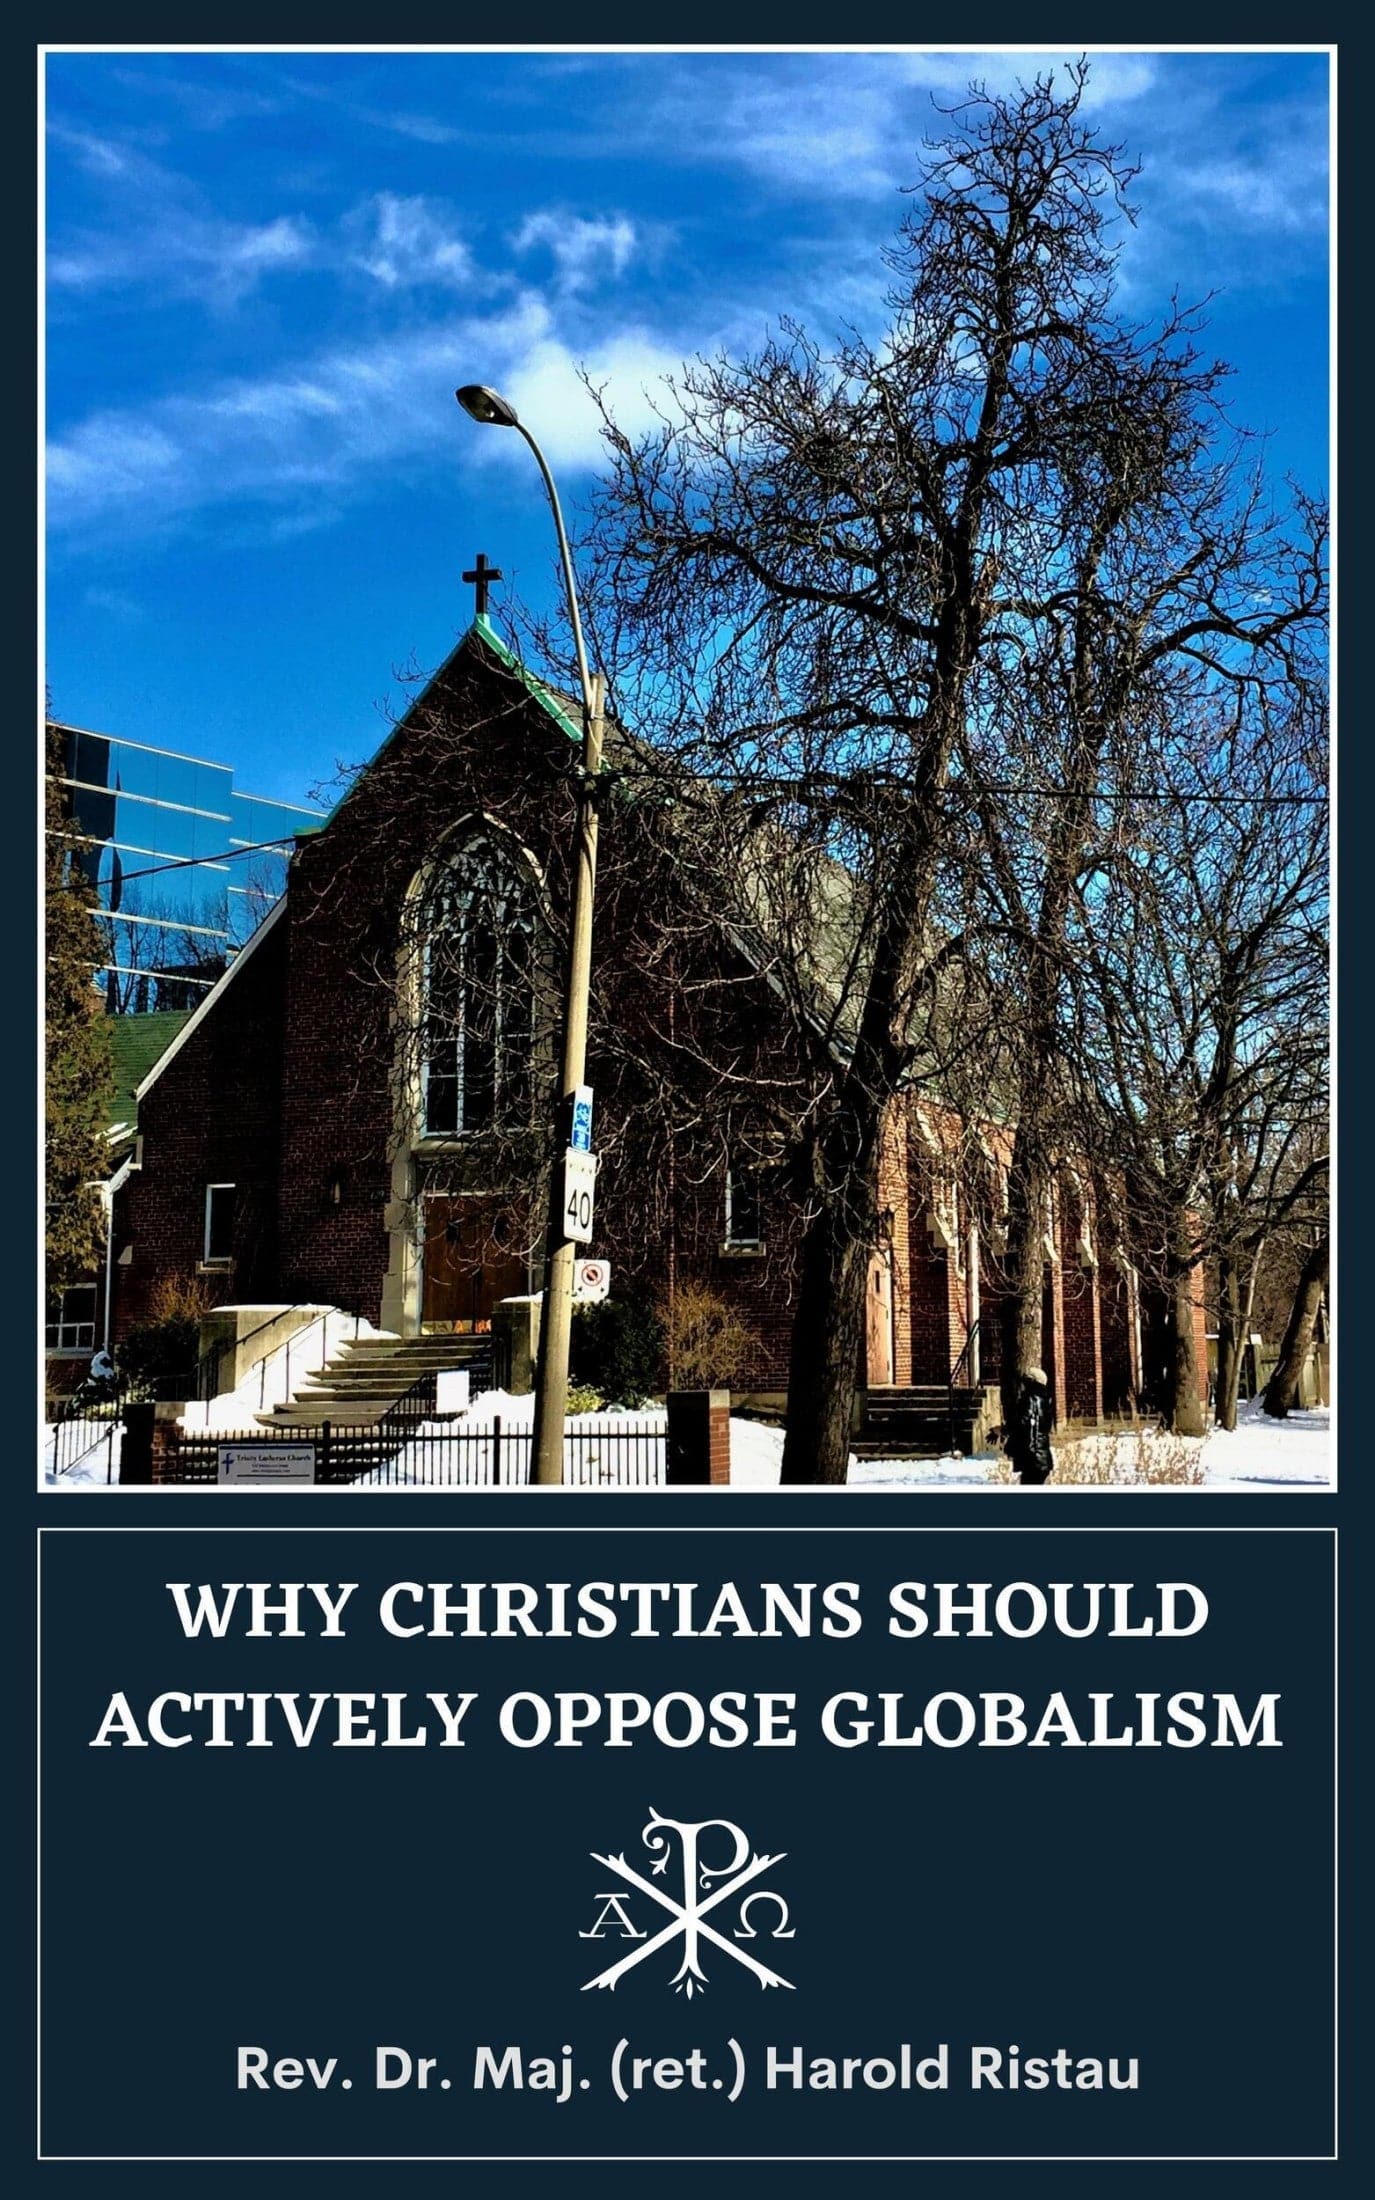 Why Christians Should Actively Oppose Globalism - Rev. Dr. Harold Ristau